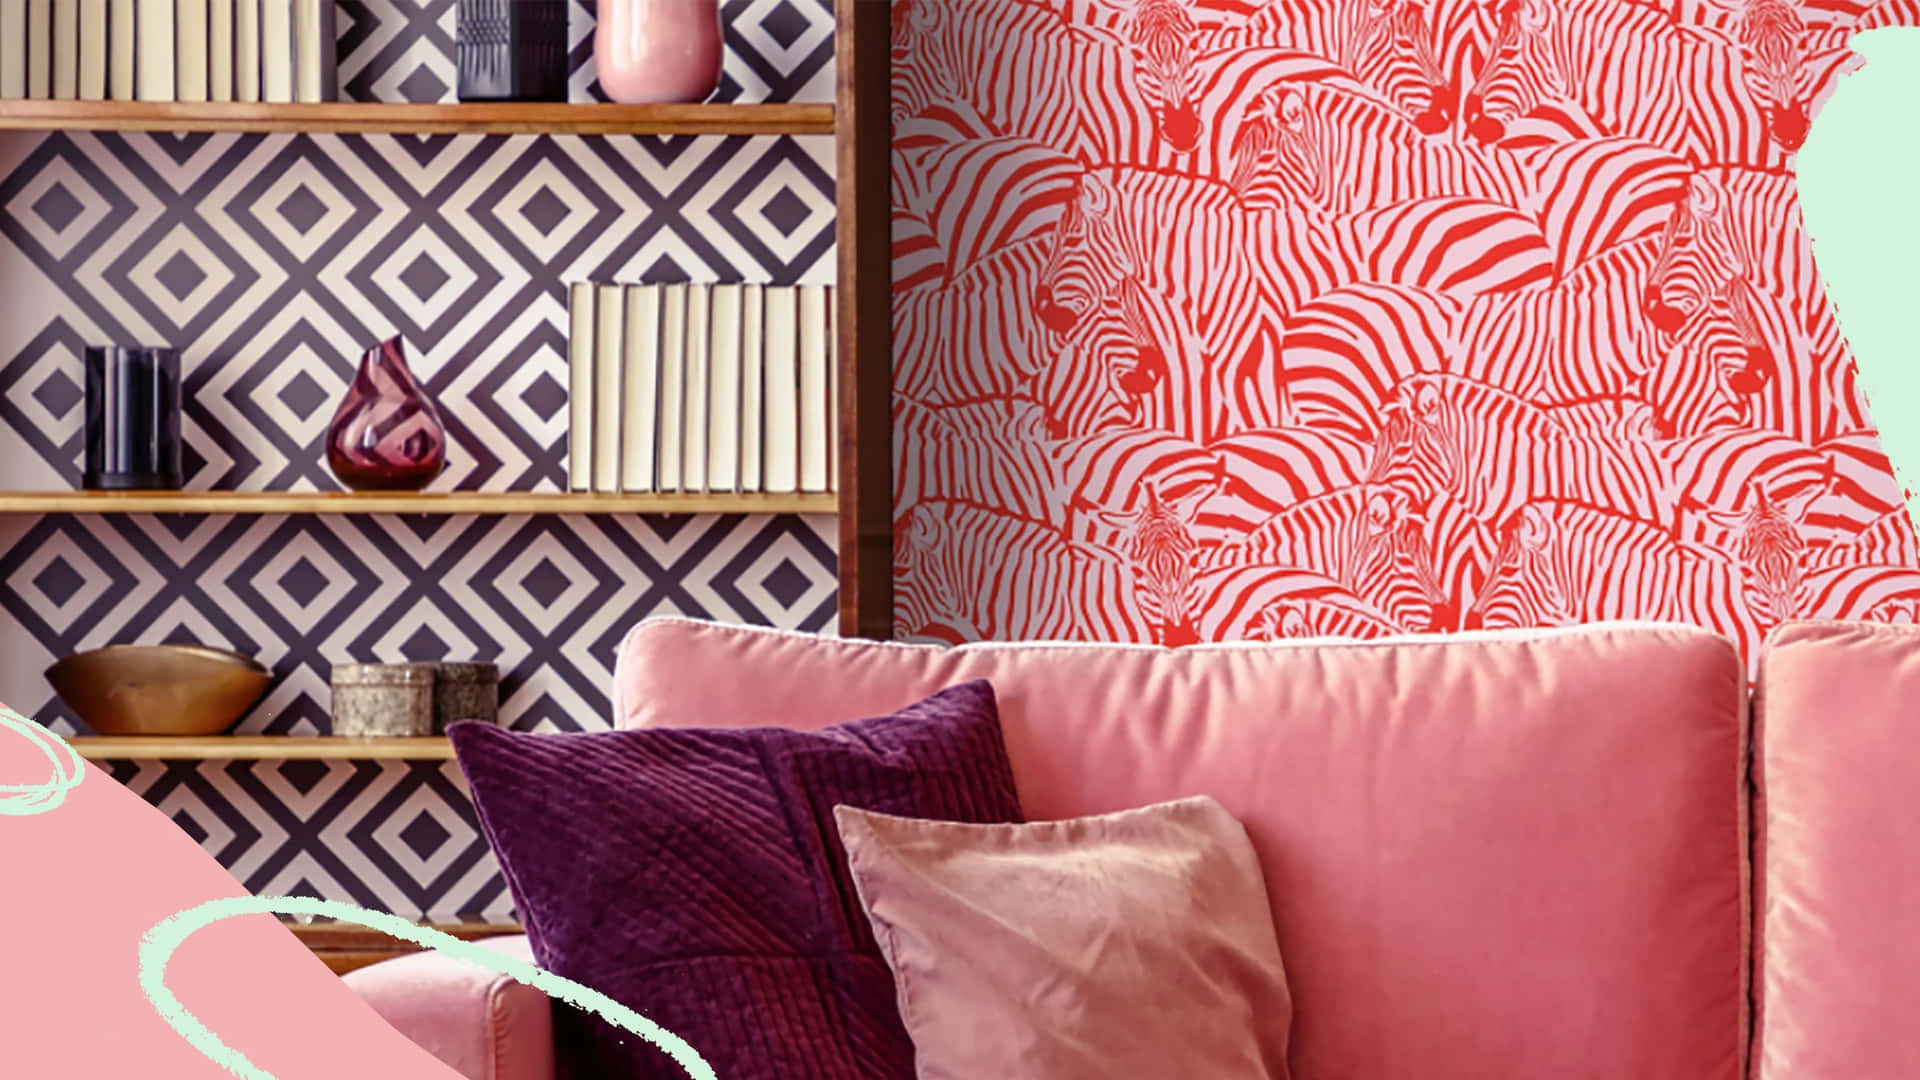 Put a modern spin on your home decor with this eye-catching abstract wall art Wallpaper